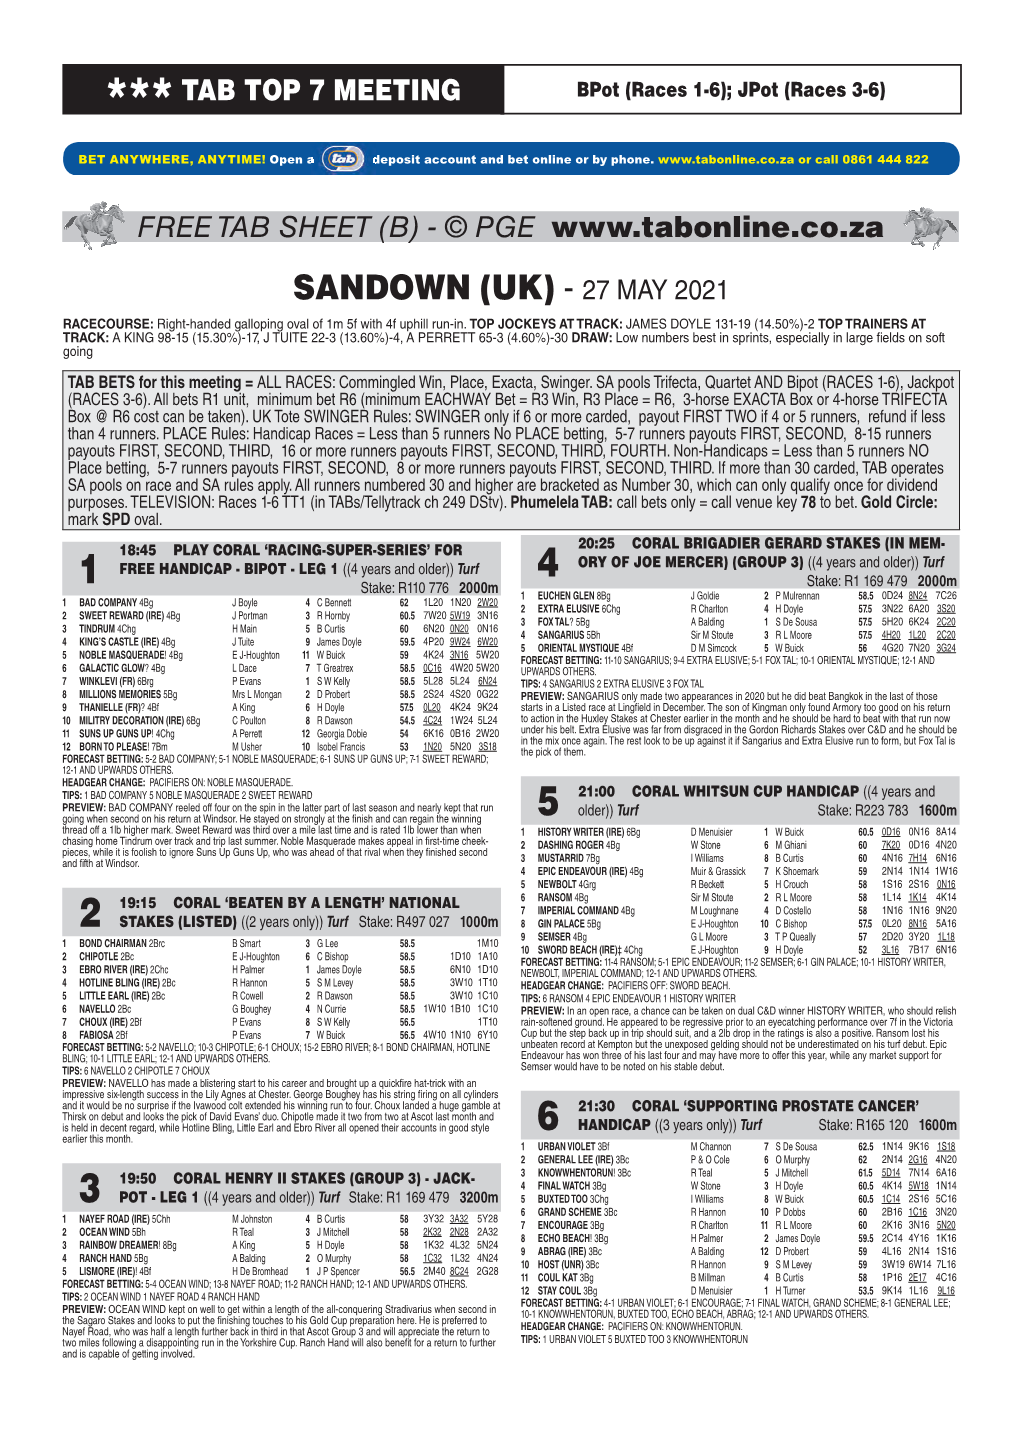 SANDOWN (UK) - 27 MAY 2021 RACECOURSE: Right-Handed Galloping Oval of 1M 5F with 4F Uphill Run-In